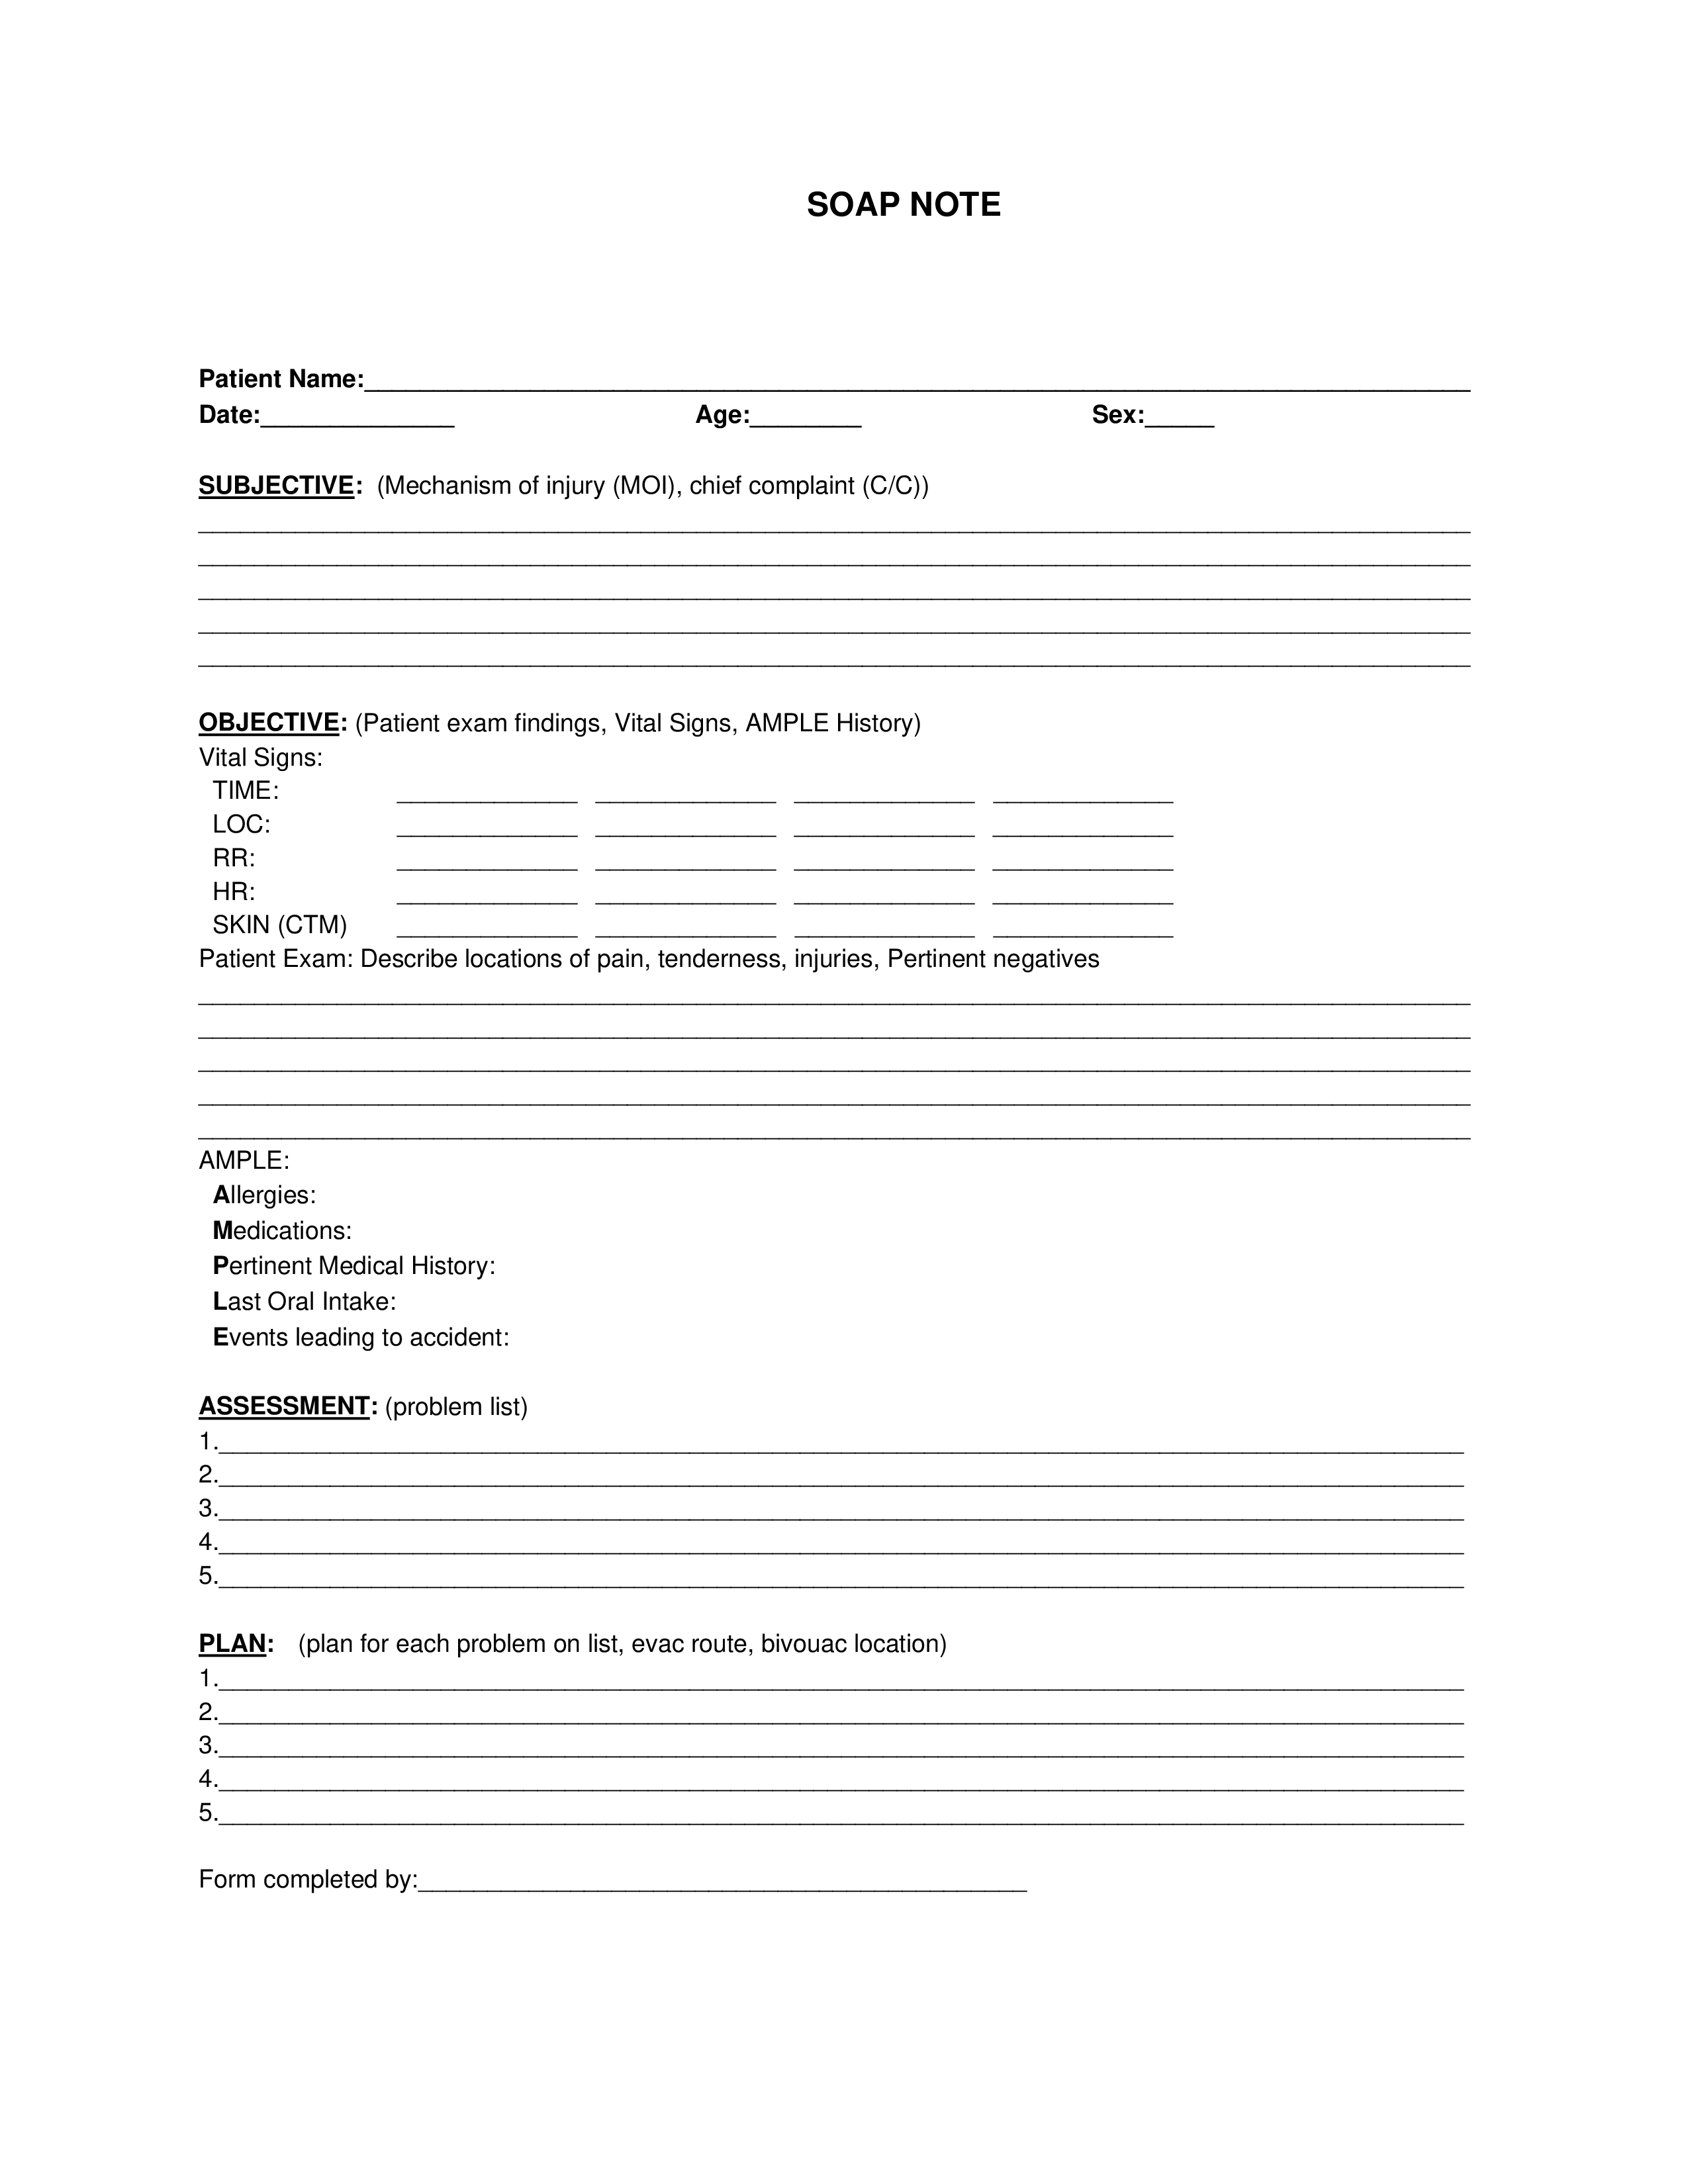 blank soap note template